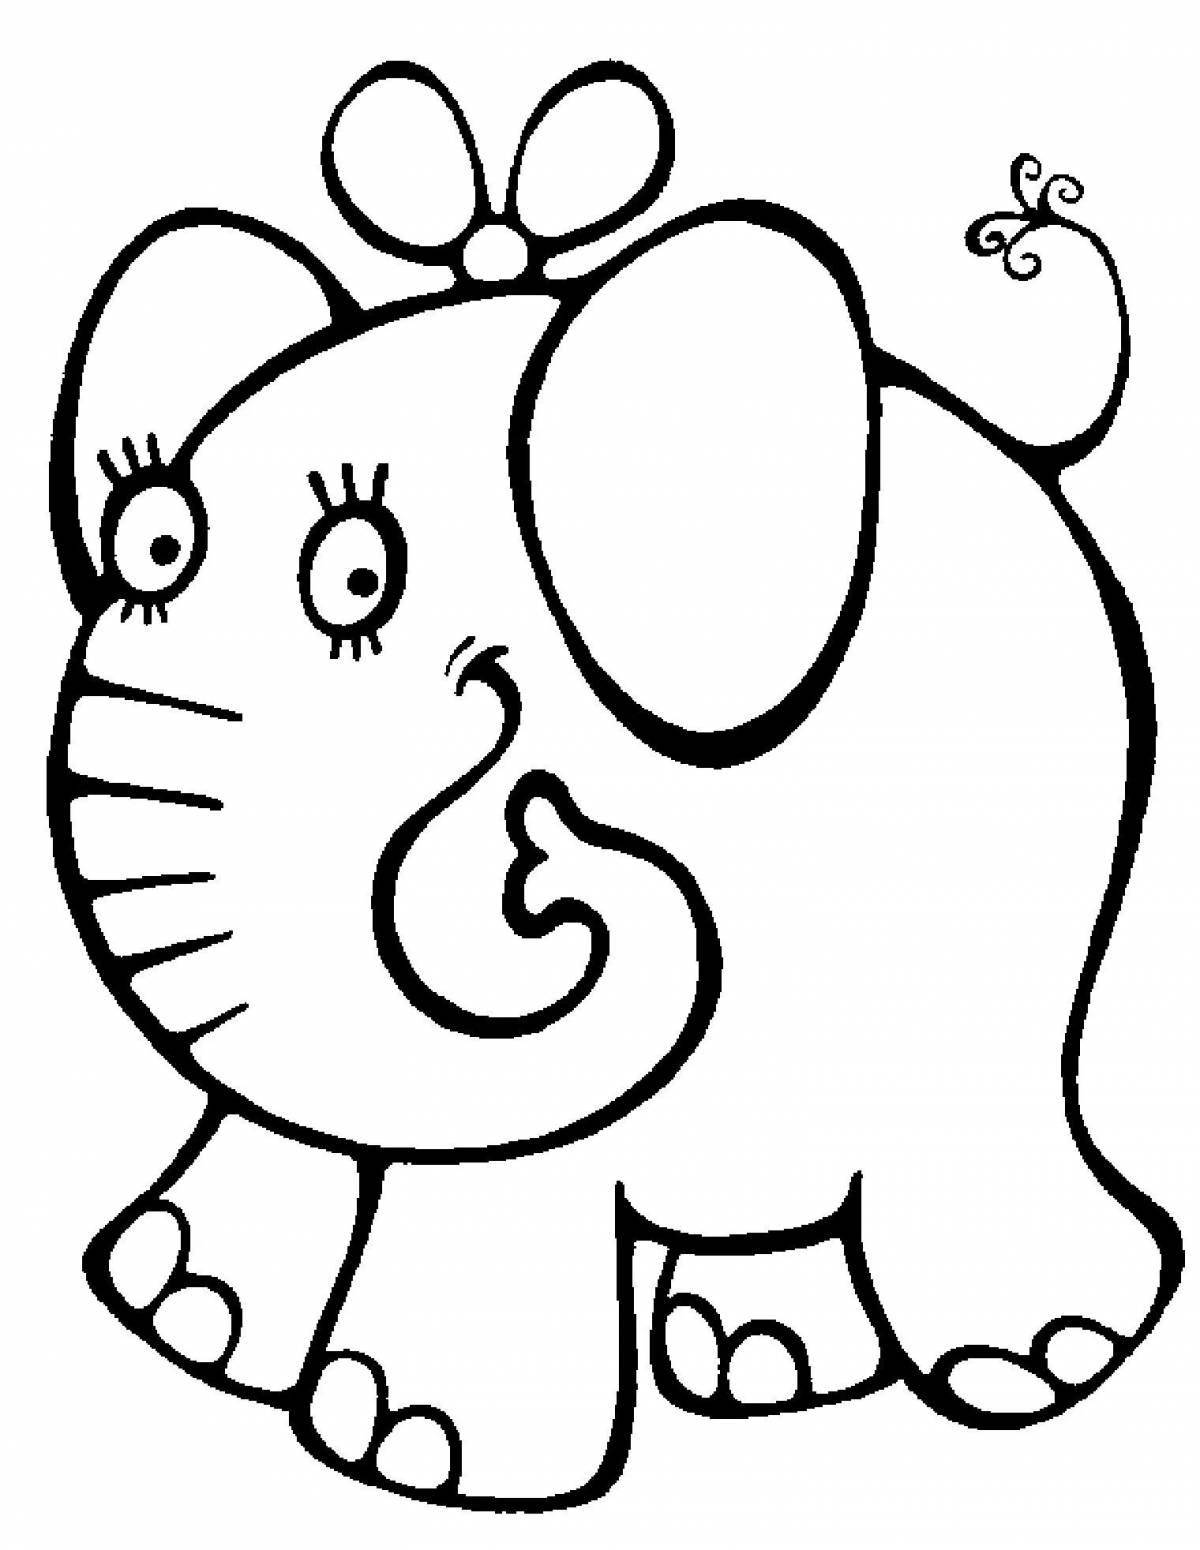 Delicate coloring pages with large animals